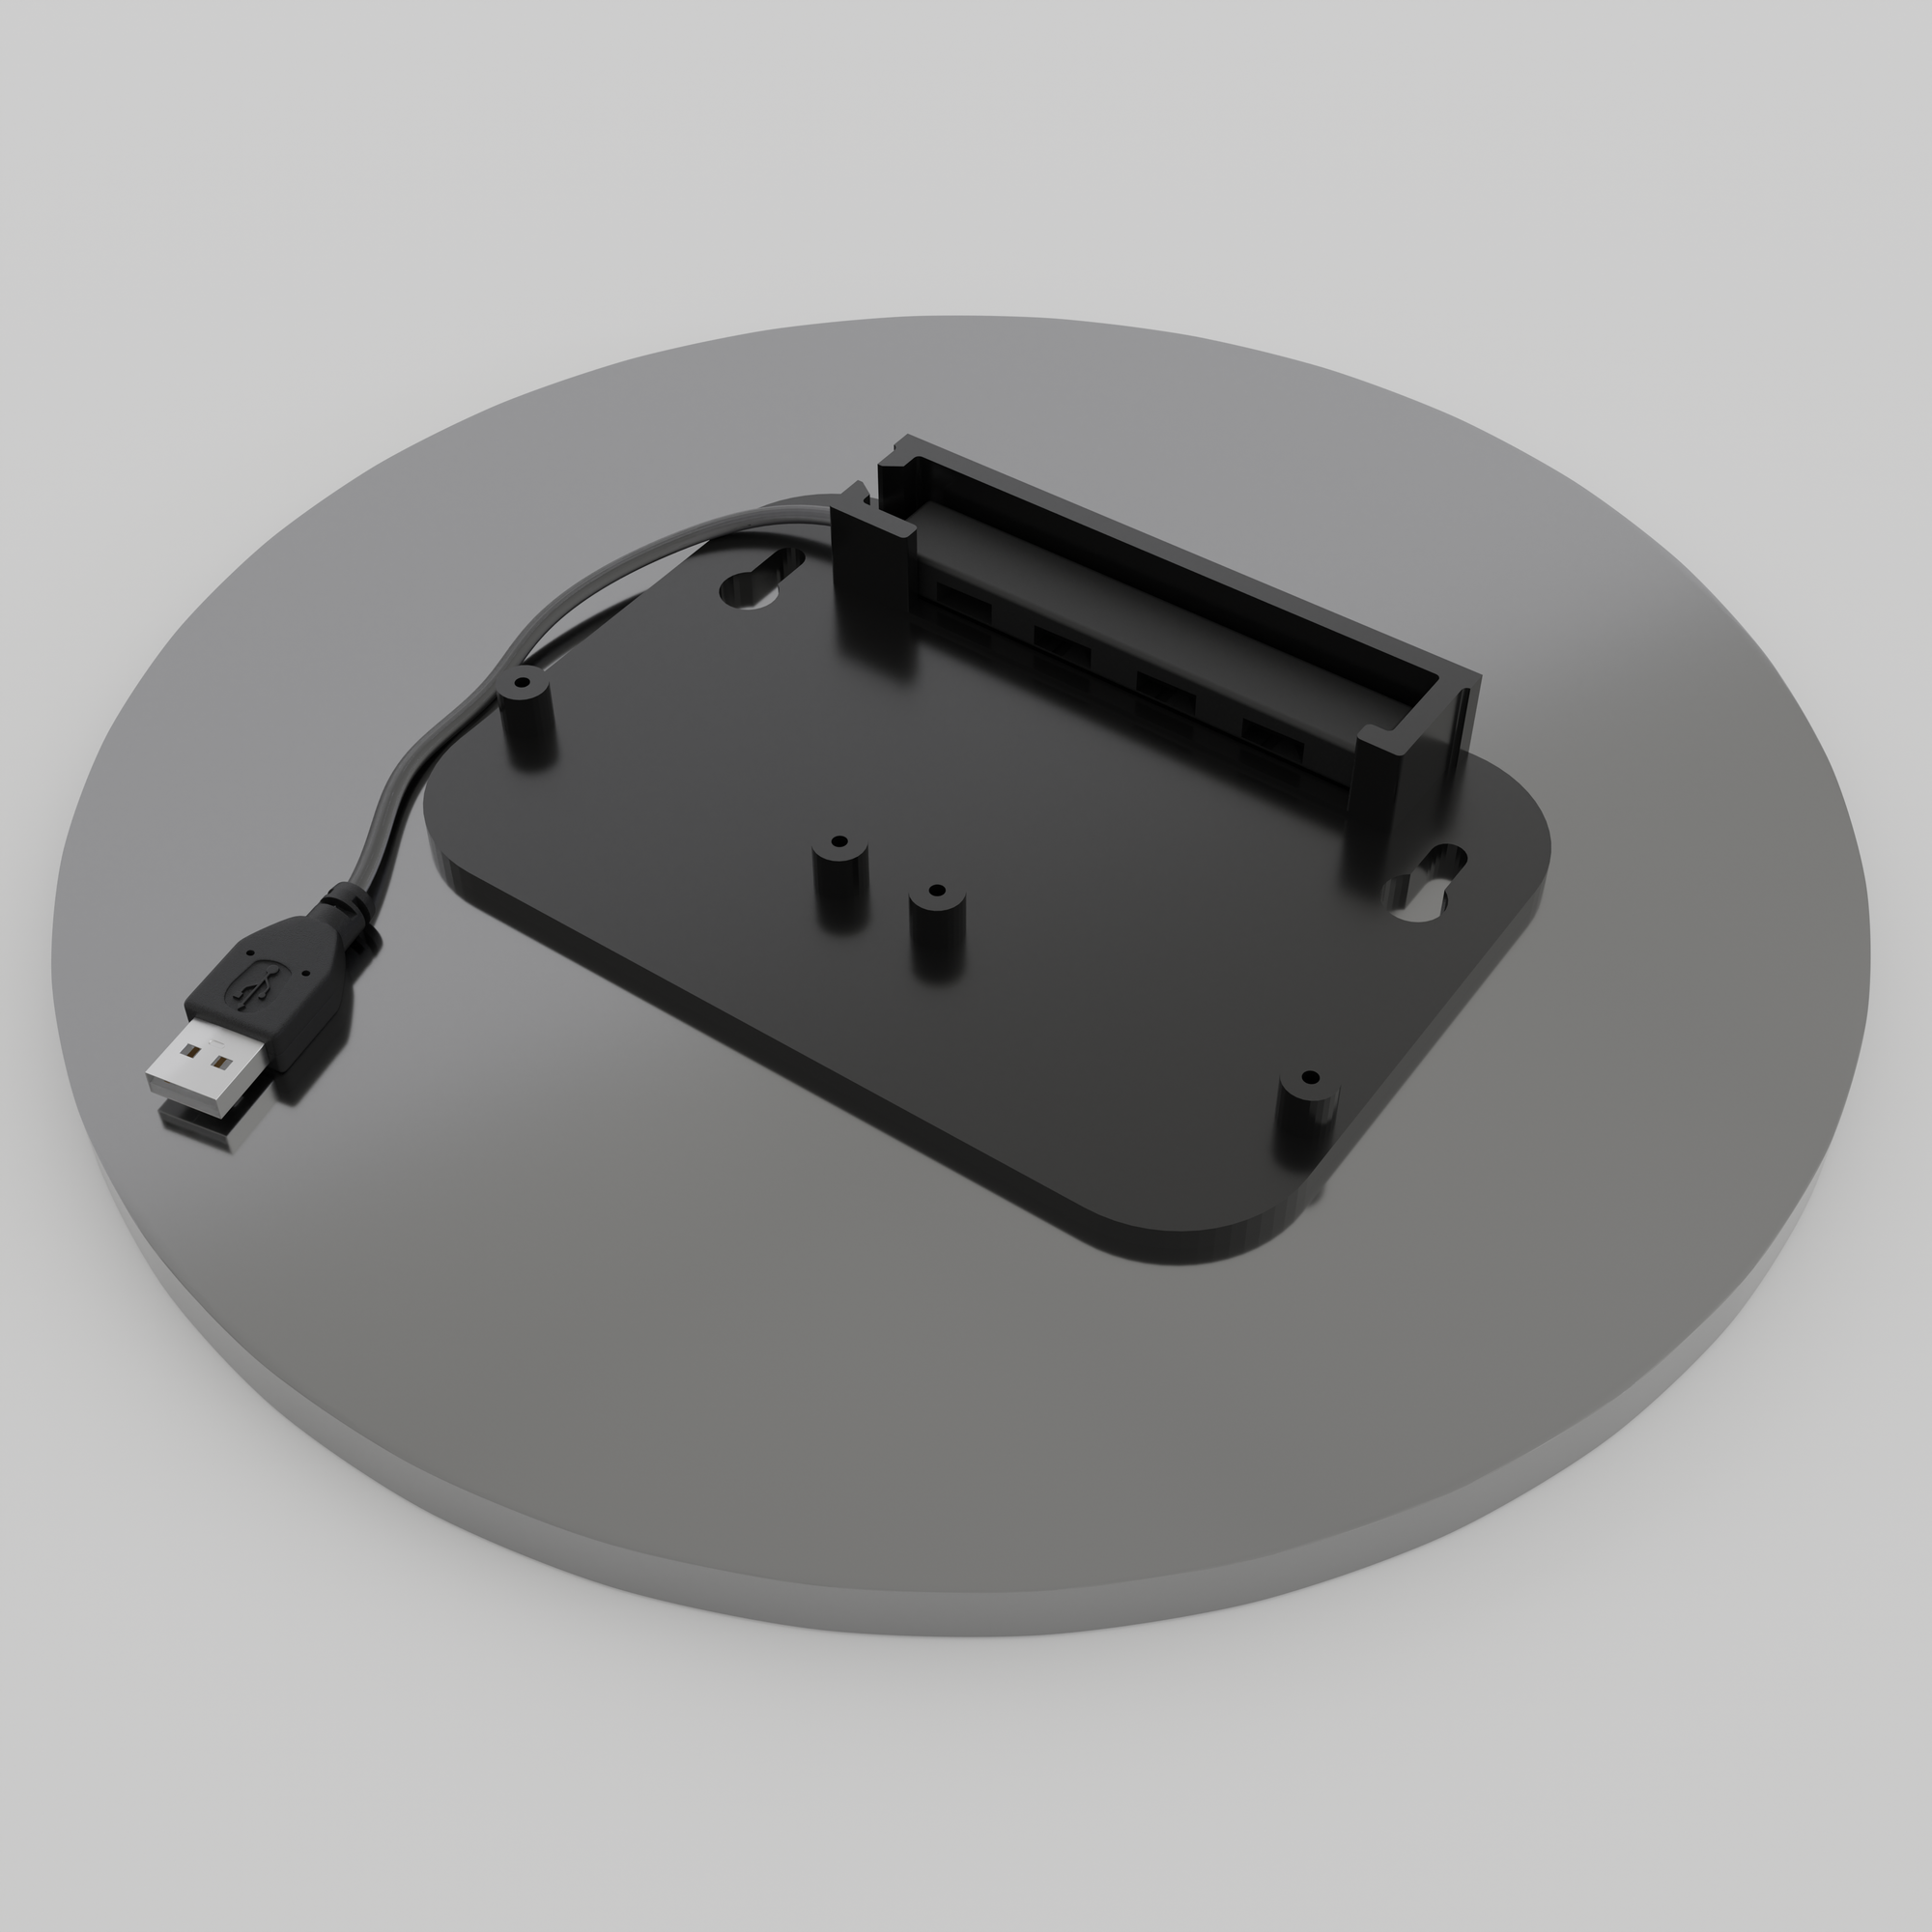 The 4-USB hub is pictured on a grey plate.